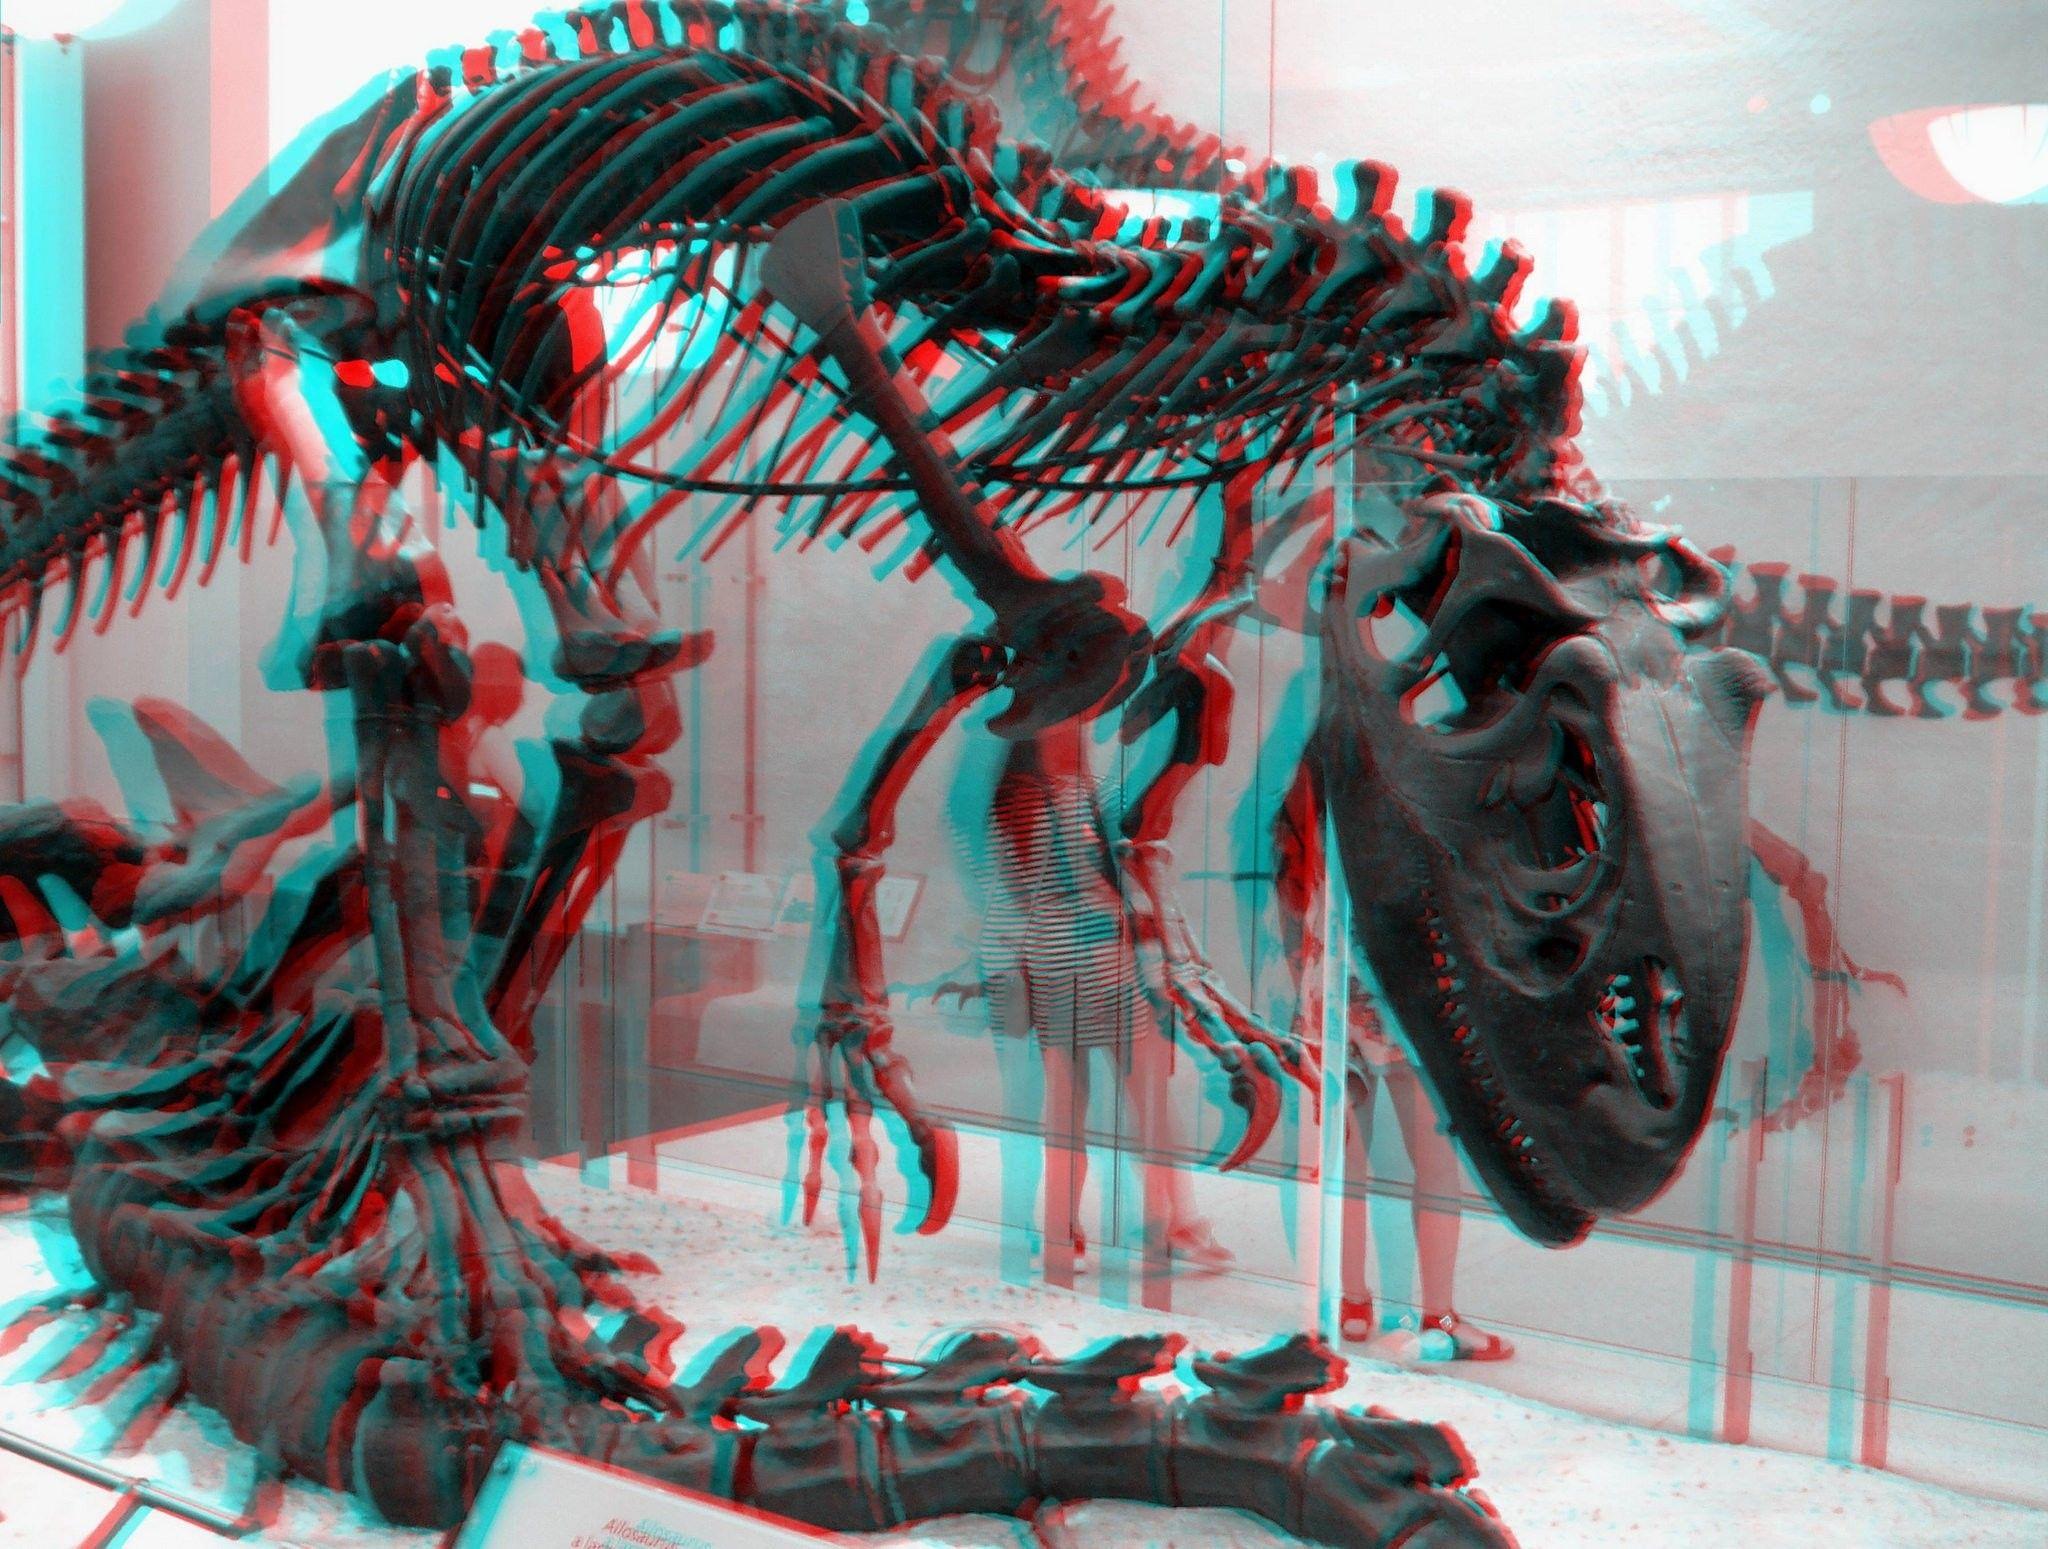 Anaglyph Wallpaper 61 images